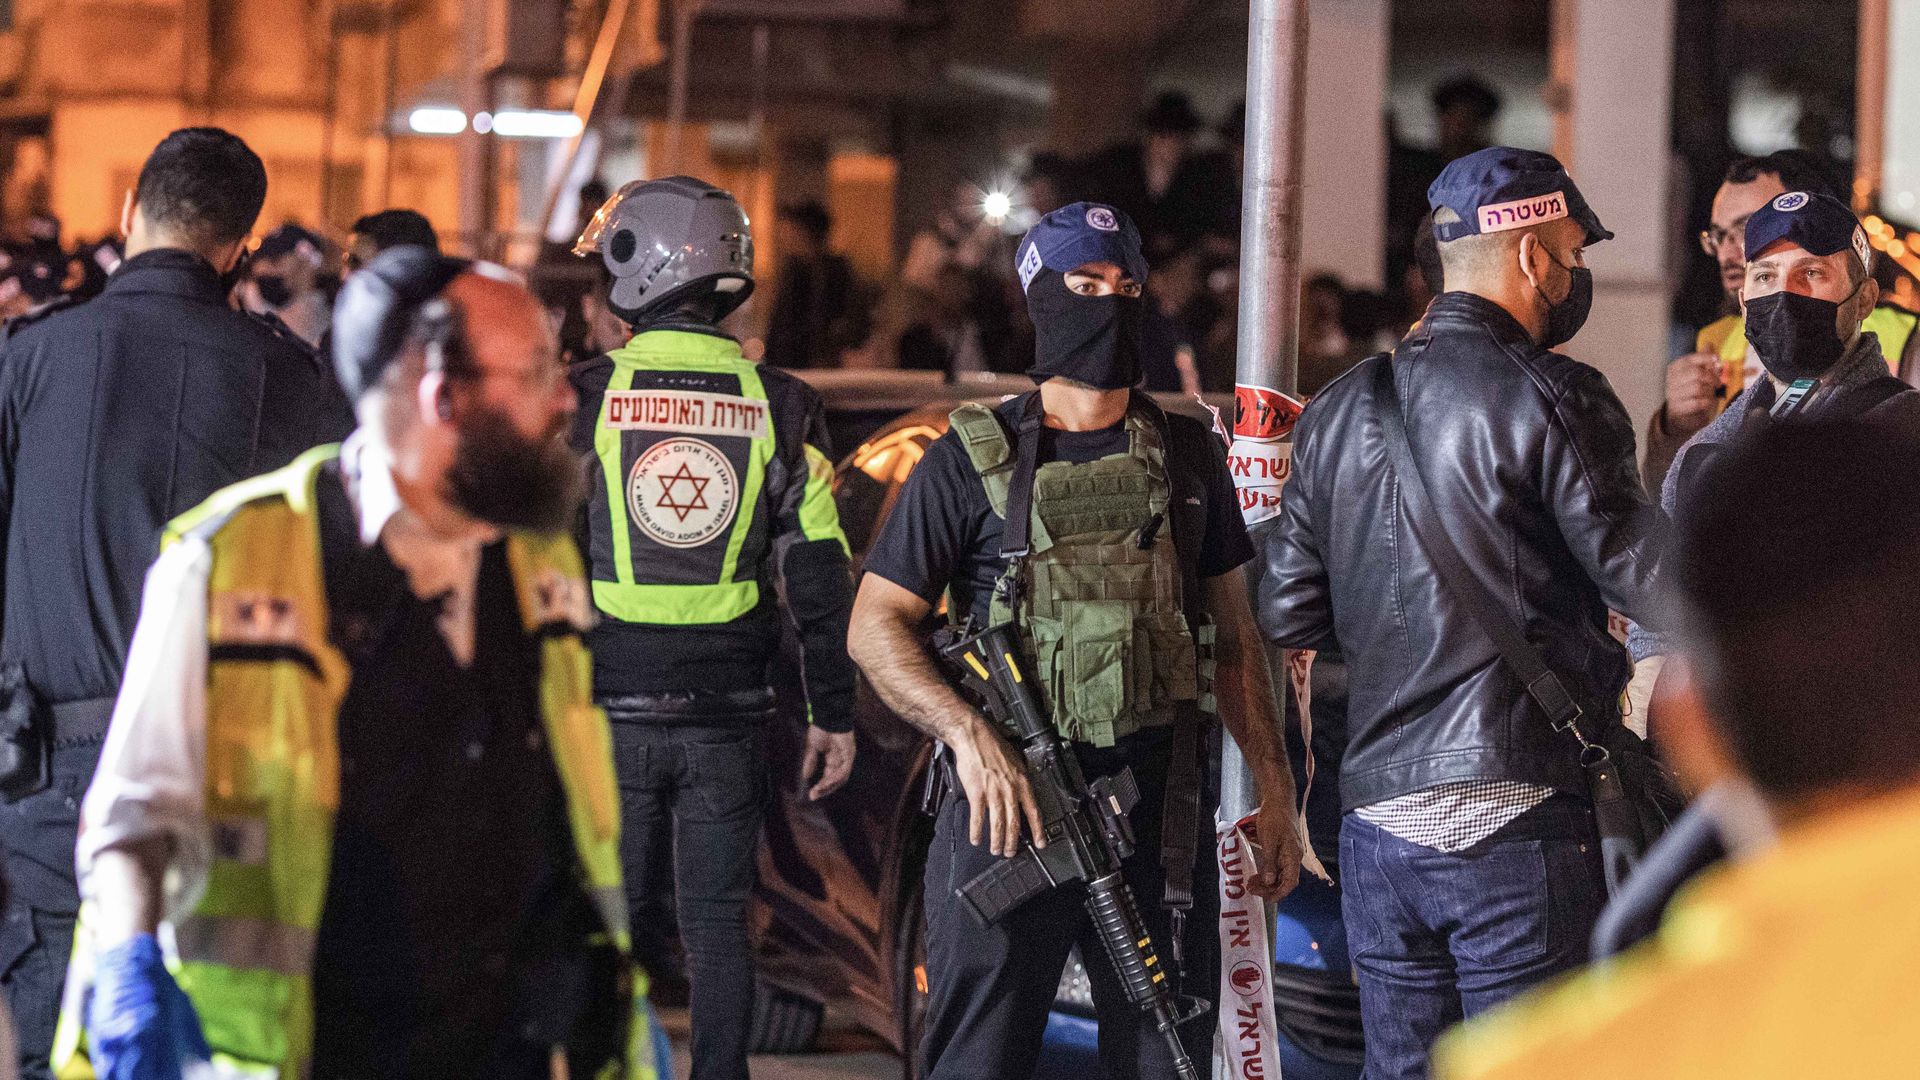 : Security forces stand at the scene following a shooting attack in Beni Brak, Israel. 